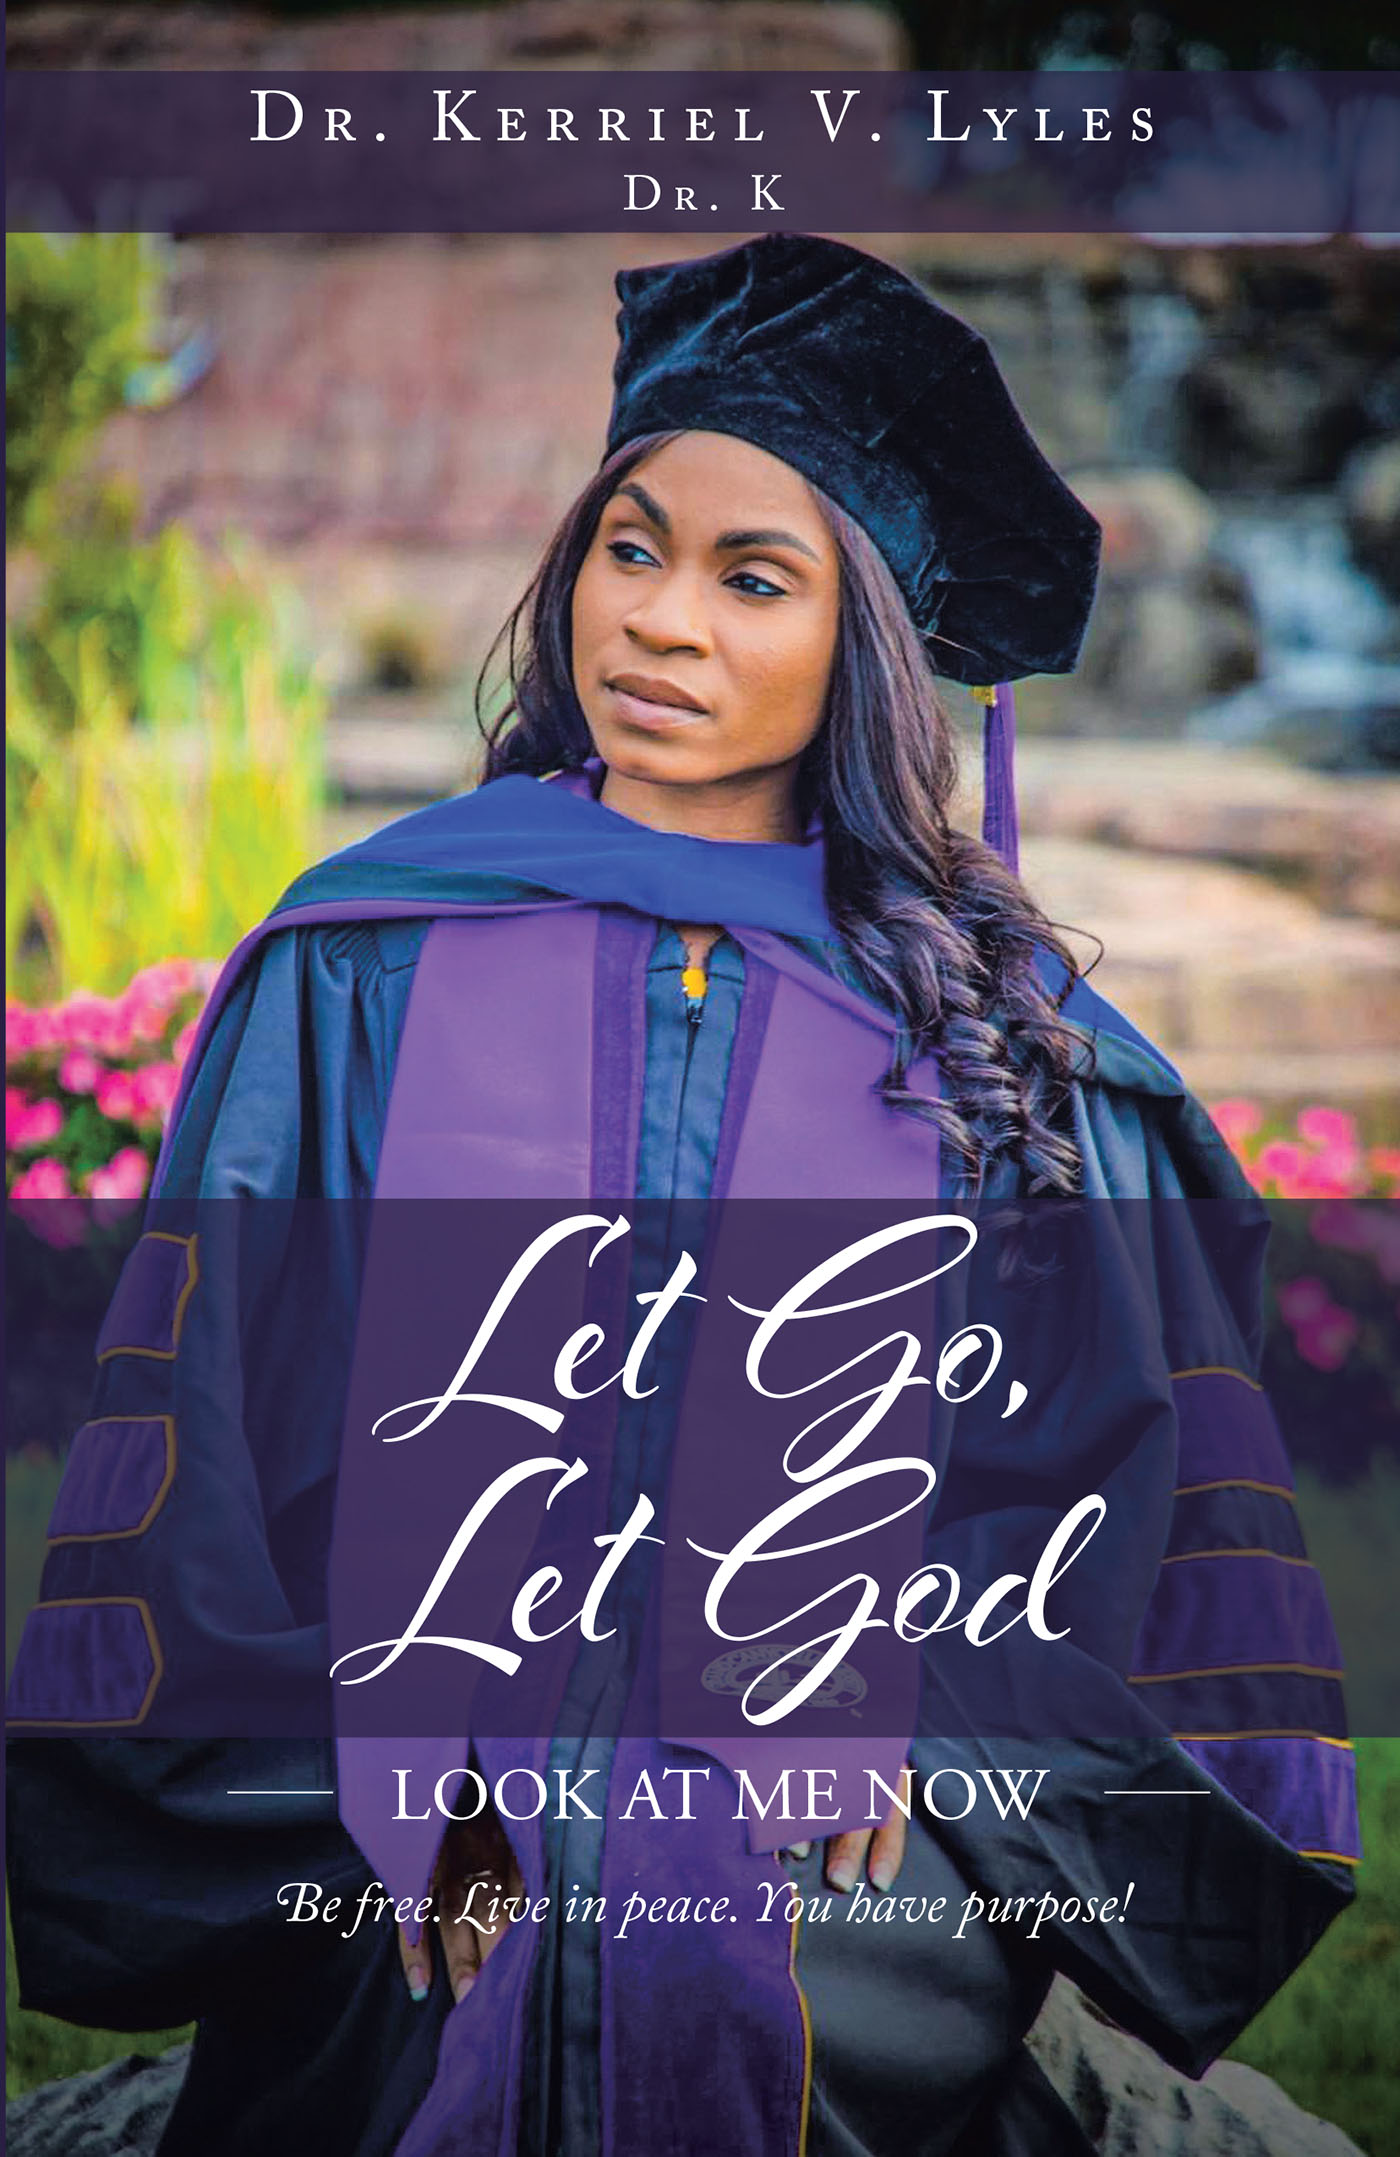 Dr. Kerriel V. Lyles’s Newly Released “Let Go, Let God: Look At Me Now: Be free. Live in peace. You have purpose!” is an Encouraging Personal Memoir with Heart